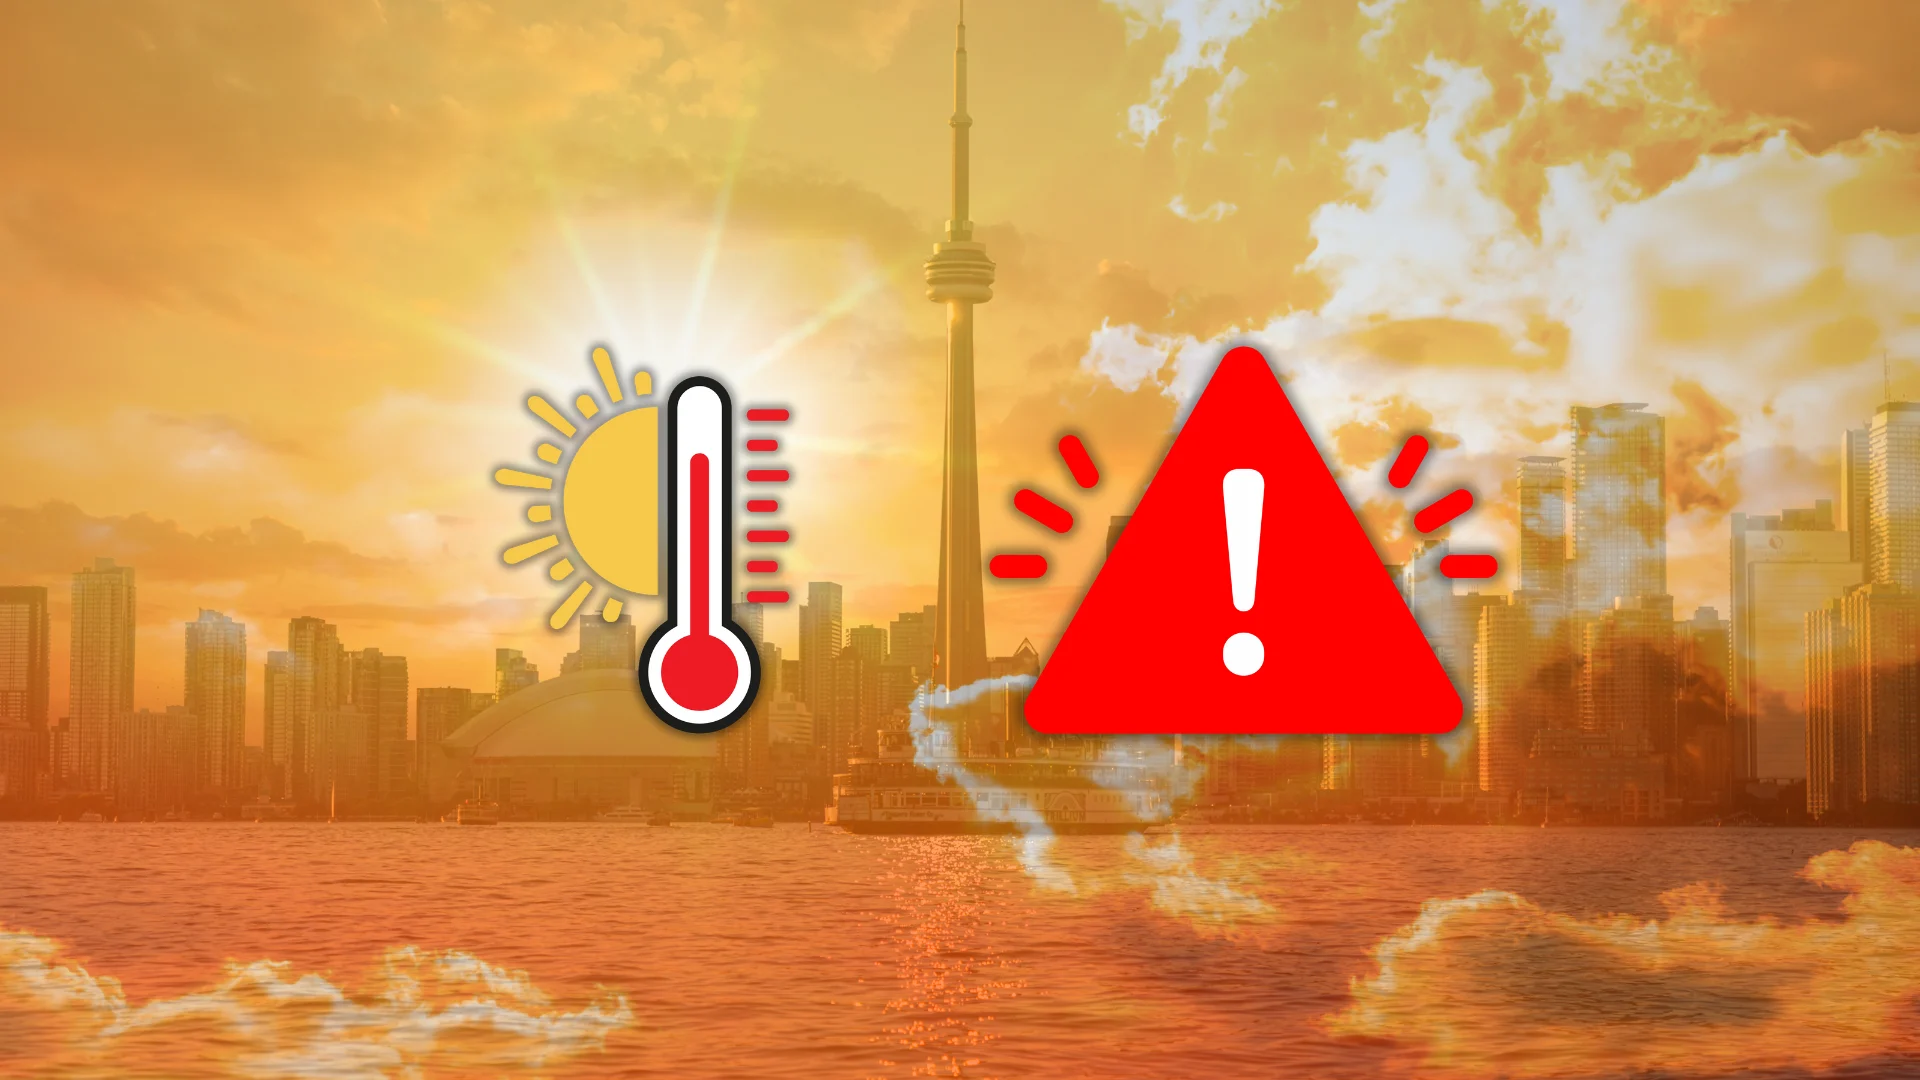 Vulnerable people will be at serious risk this week as a heat wave builds over Quebec. Timing, details, and safety info, here